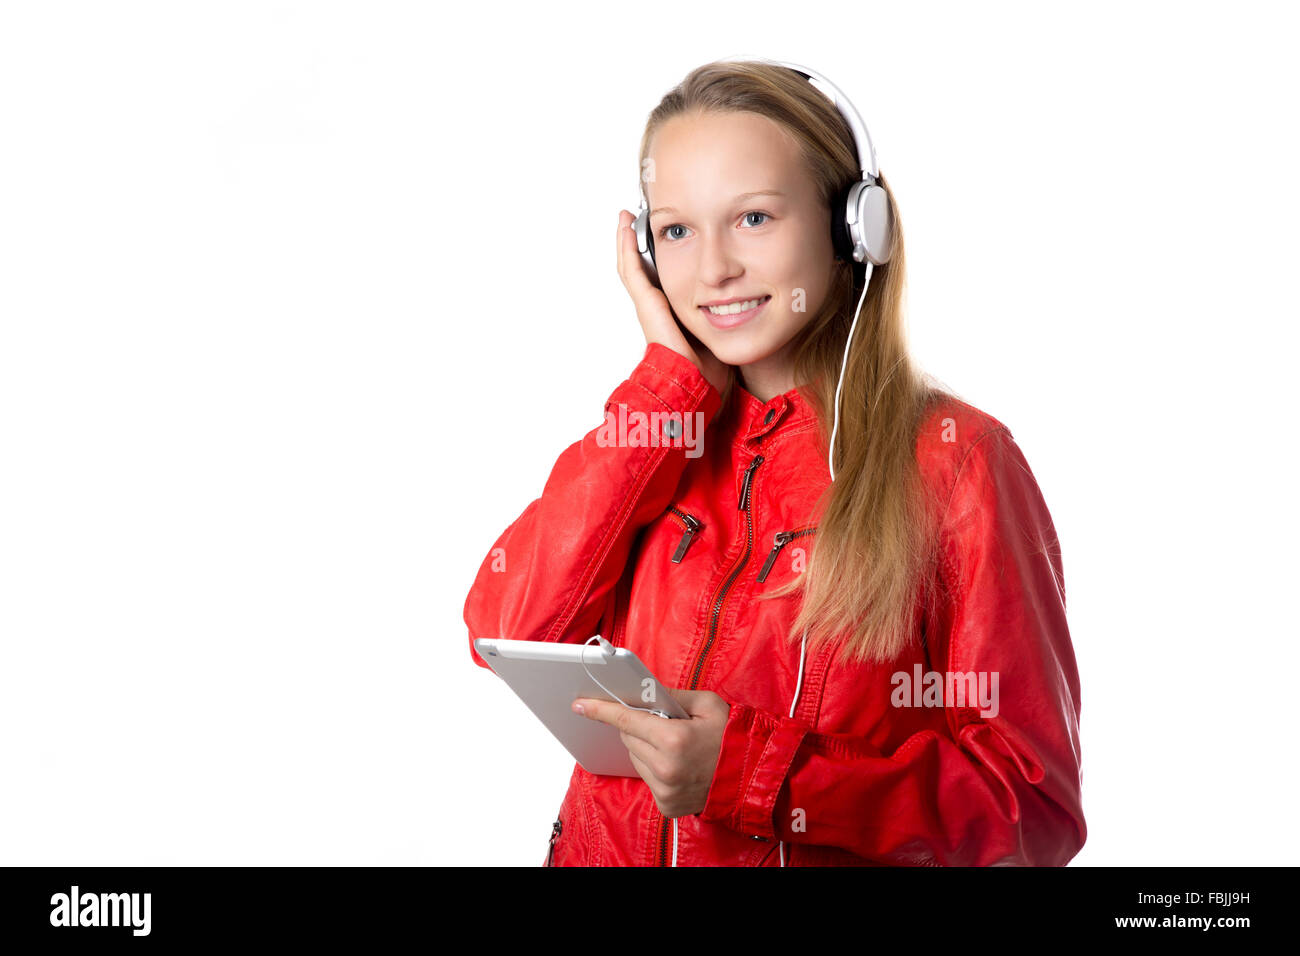 Portrait of happy beautiful casual teenage girl wearing red leather jacket and earphones using modern tablet, friendly smiling Stock Photo